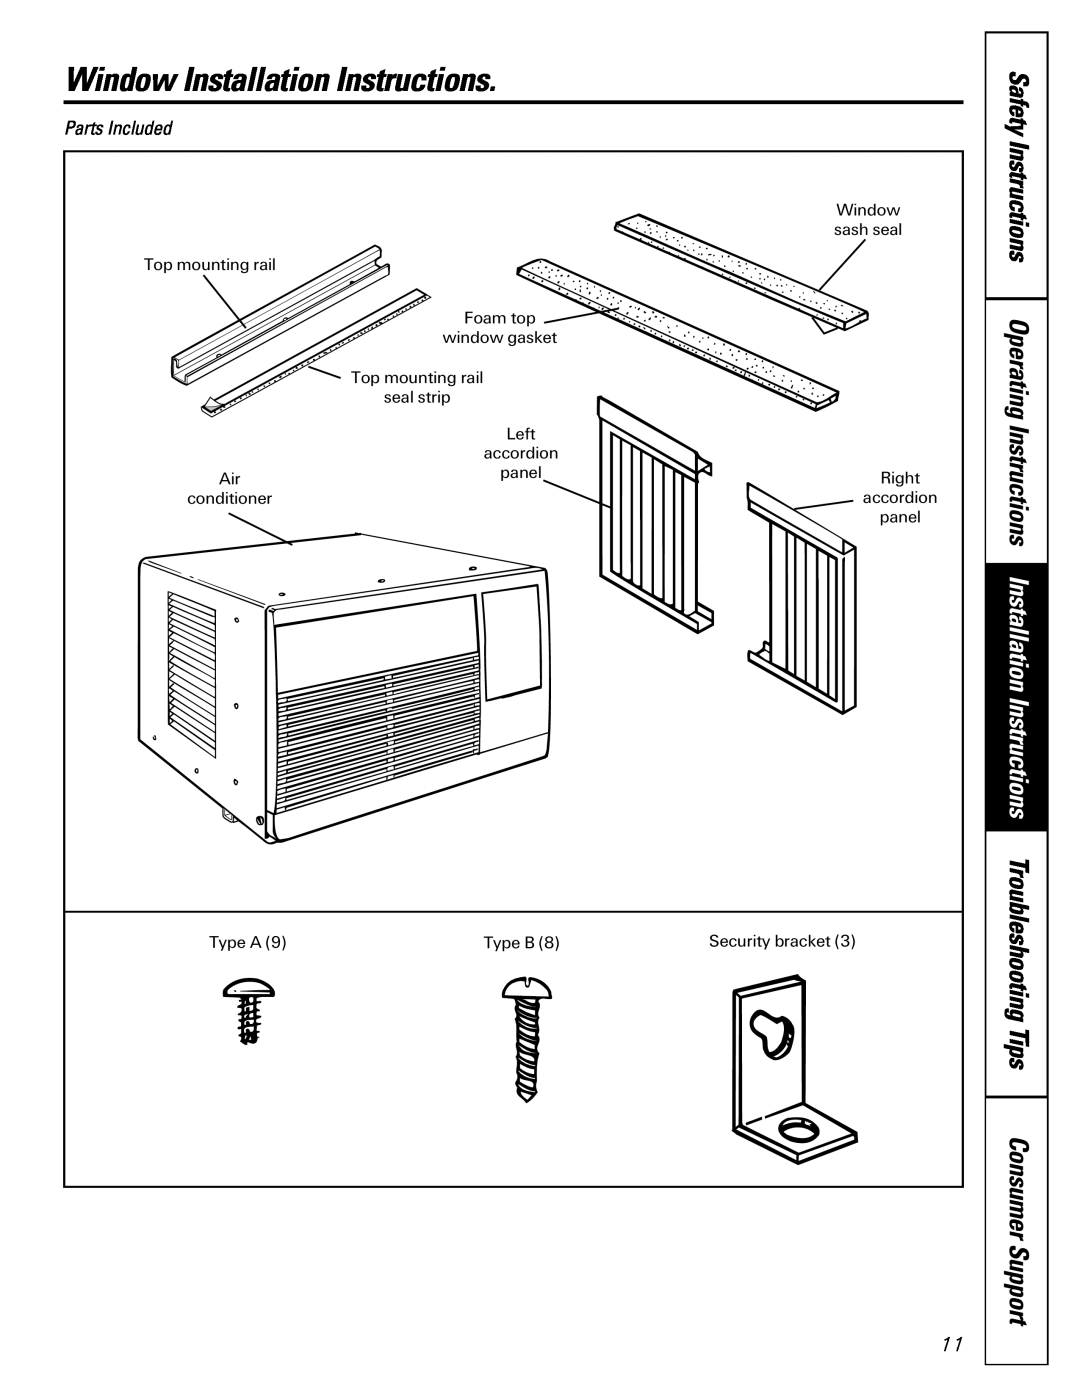 GE ASR05 installation instructions Window Installation Instructions, Parts Included 